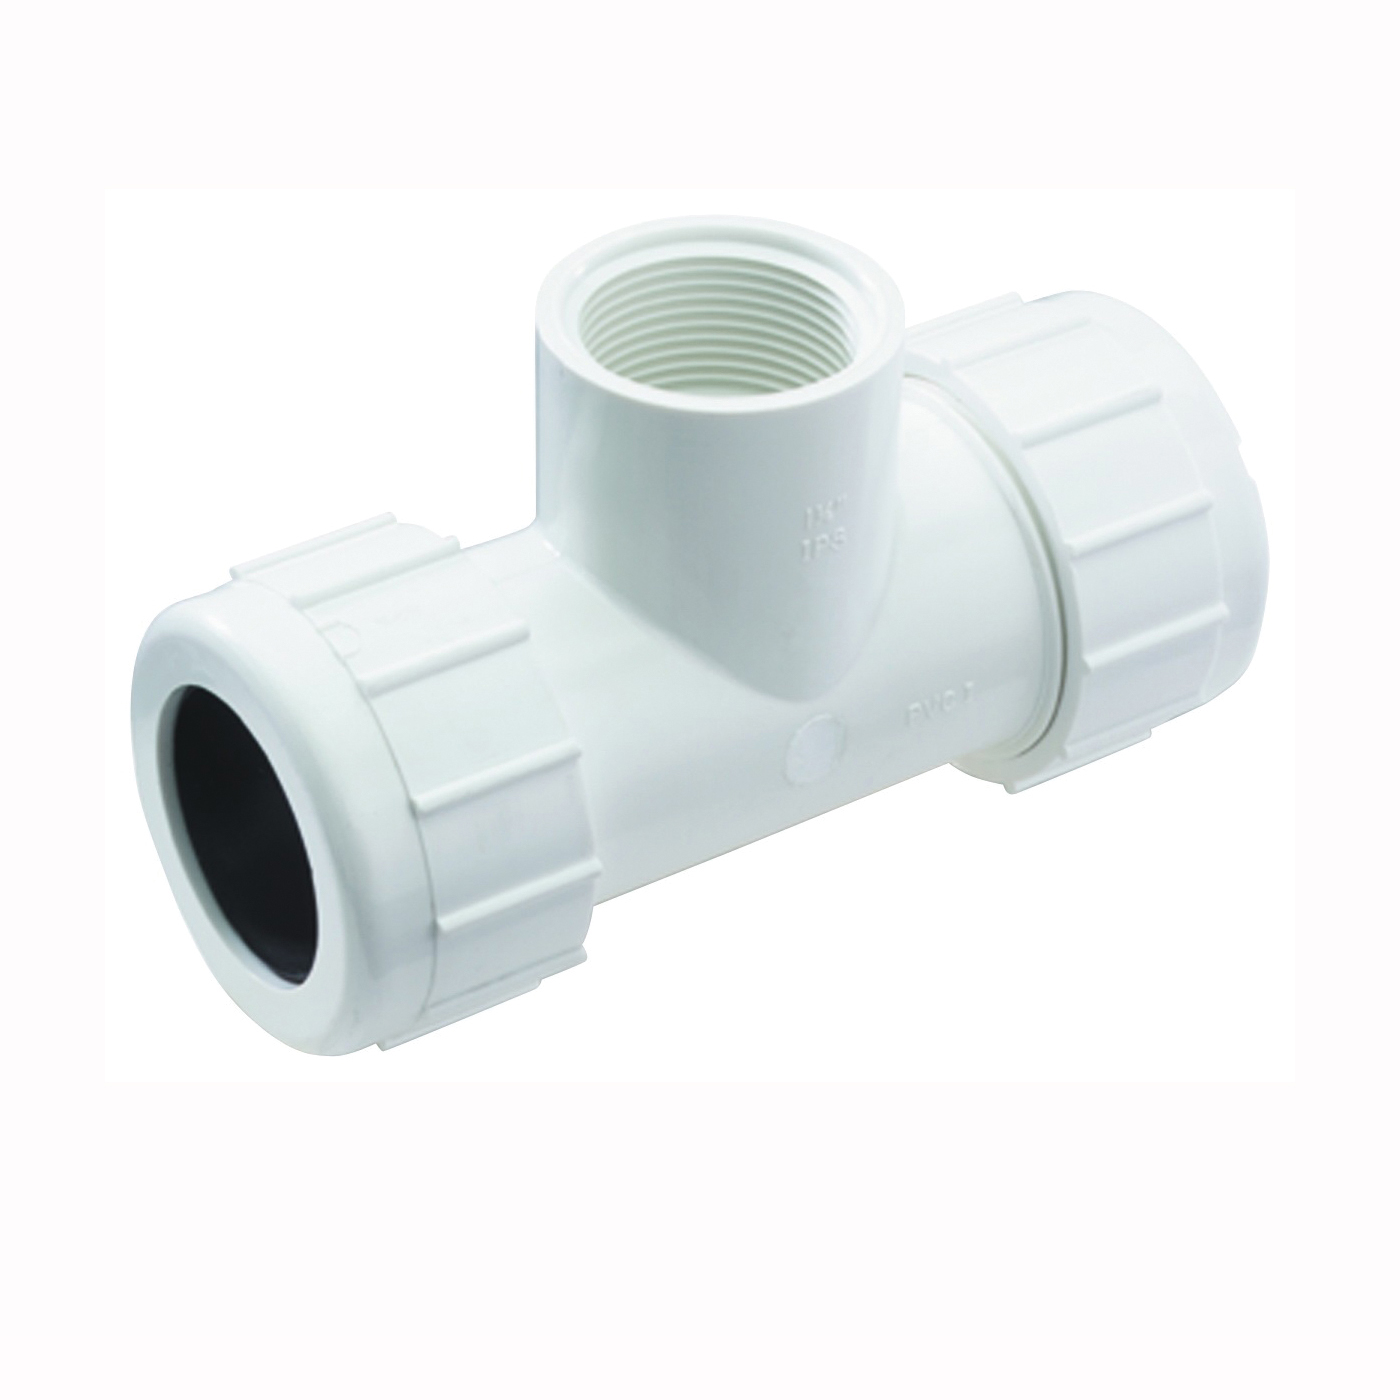 NDS CPT-0750-S Pipe Tee, 3/4 in, Compression x Slip-Joint, PVC, White, SCH 40 Schedule, 150 psi Pressure